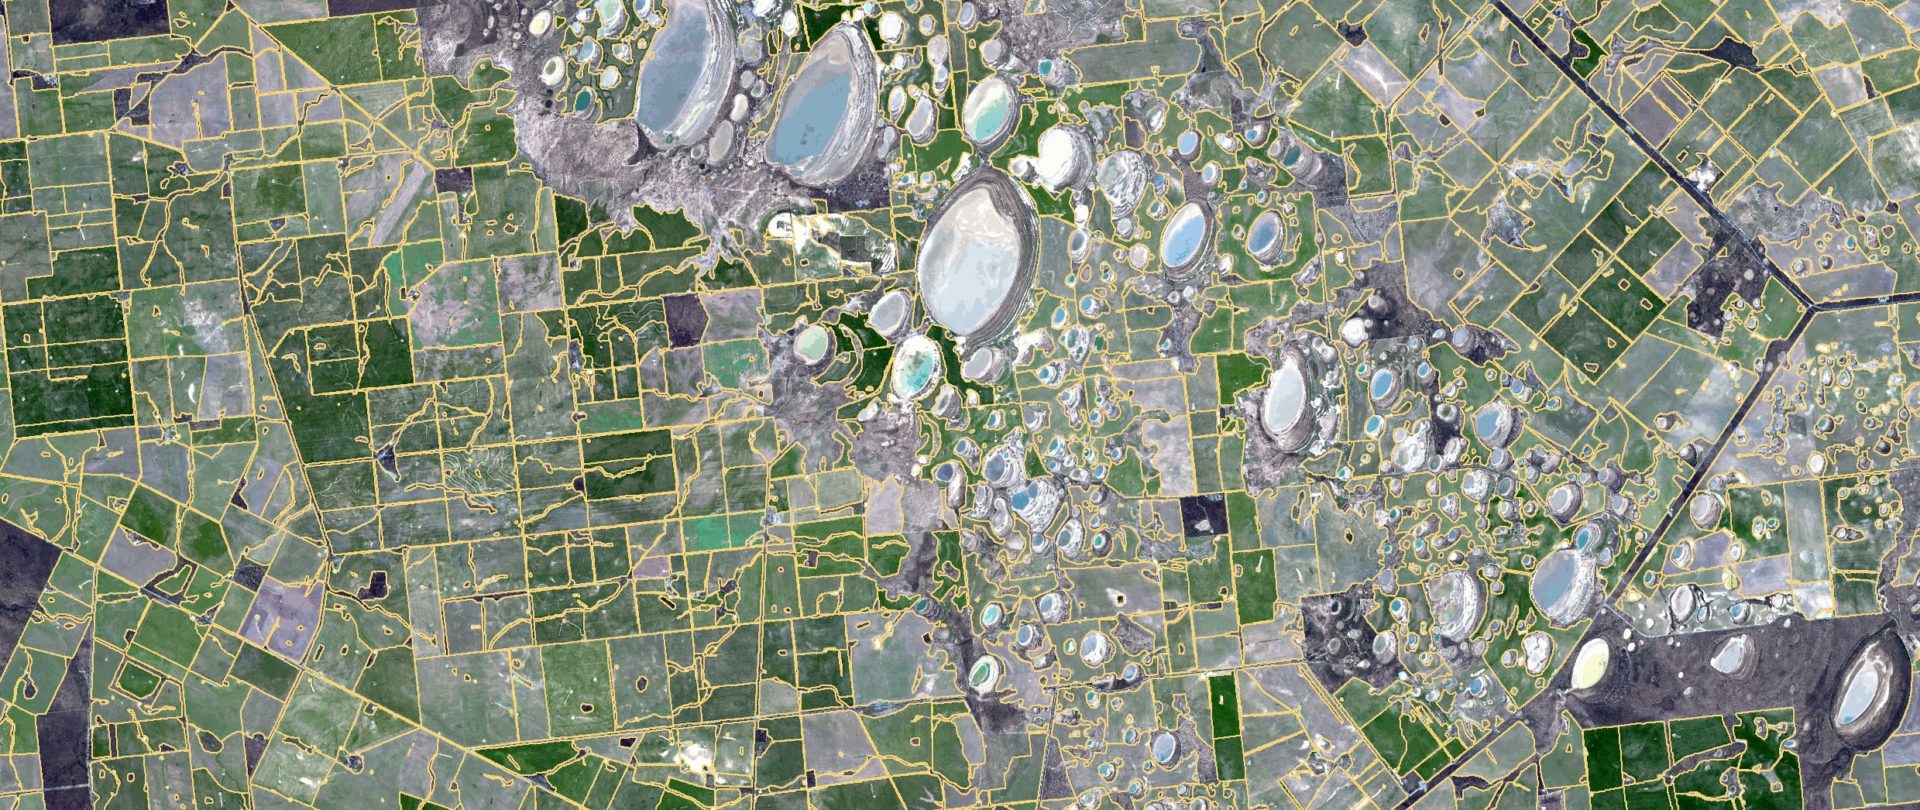 Satellite image of paddocks in Western Australia overlaid with boundaries as identified with our new tech.